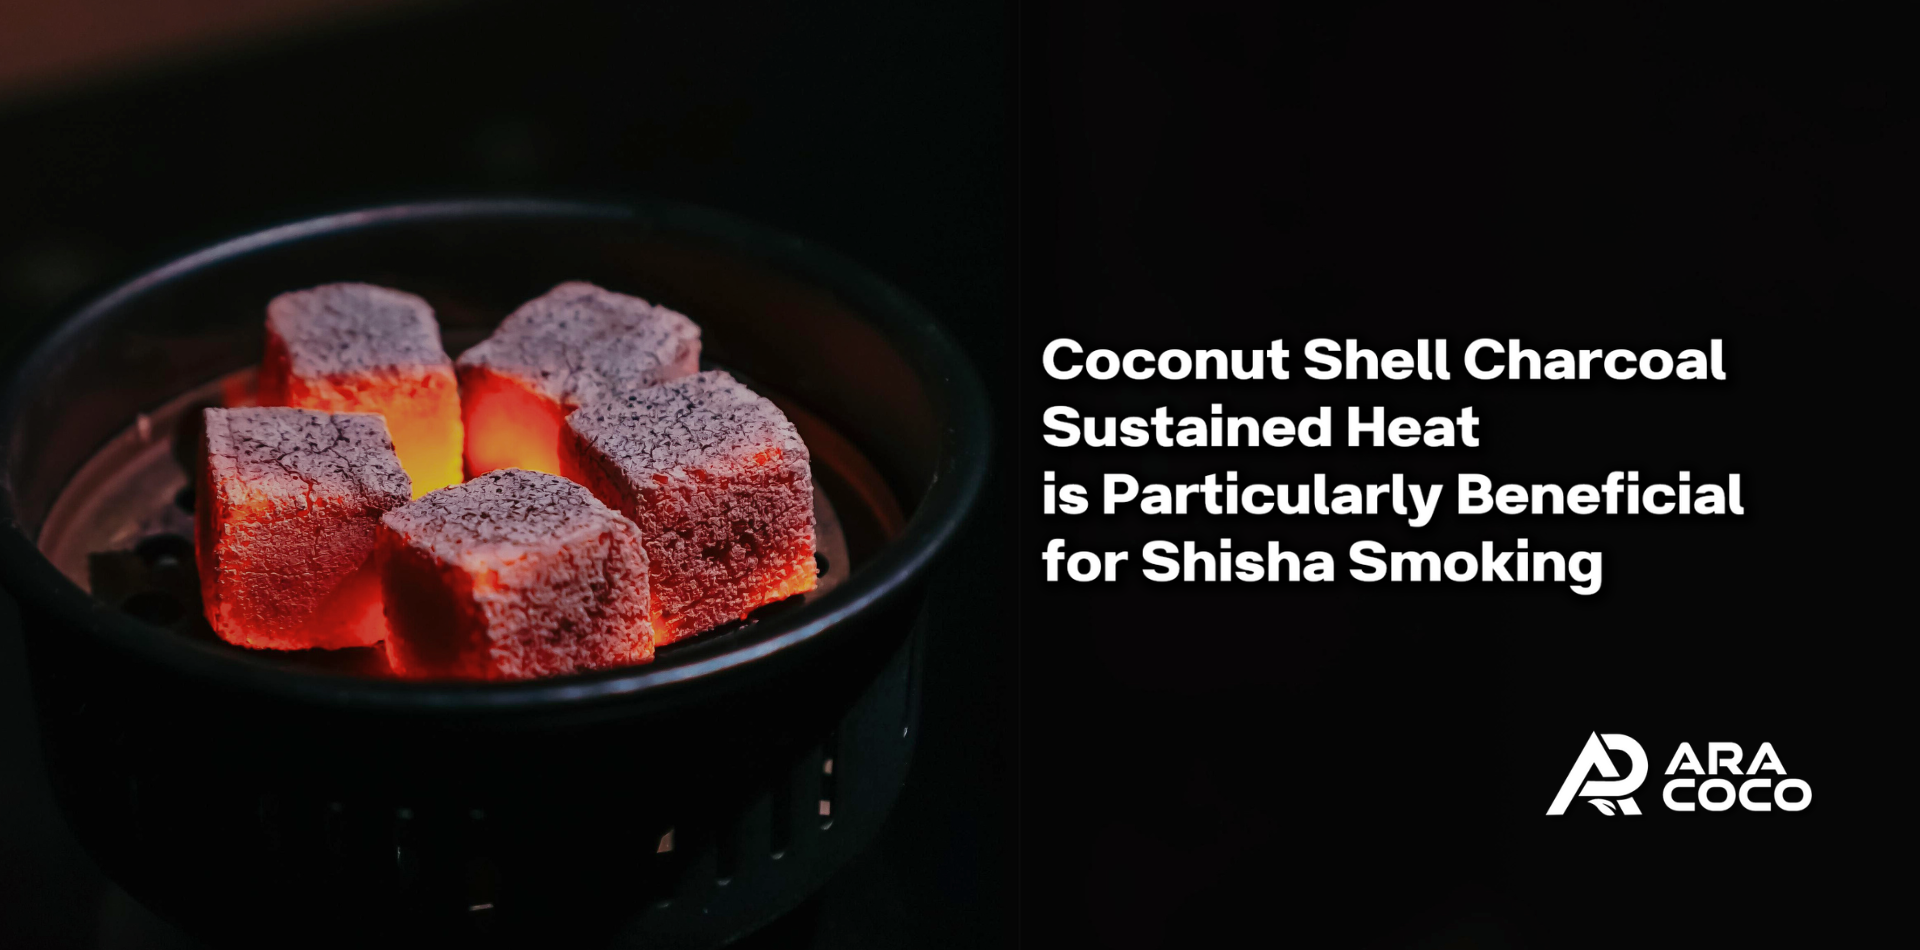 Coconut shell charcoal is known for its high burning efficiency.